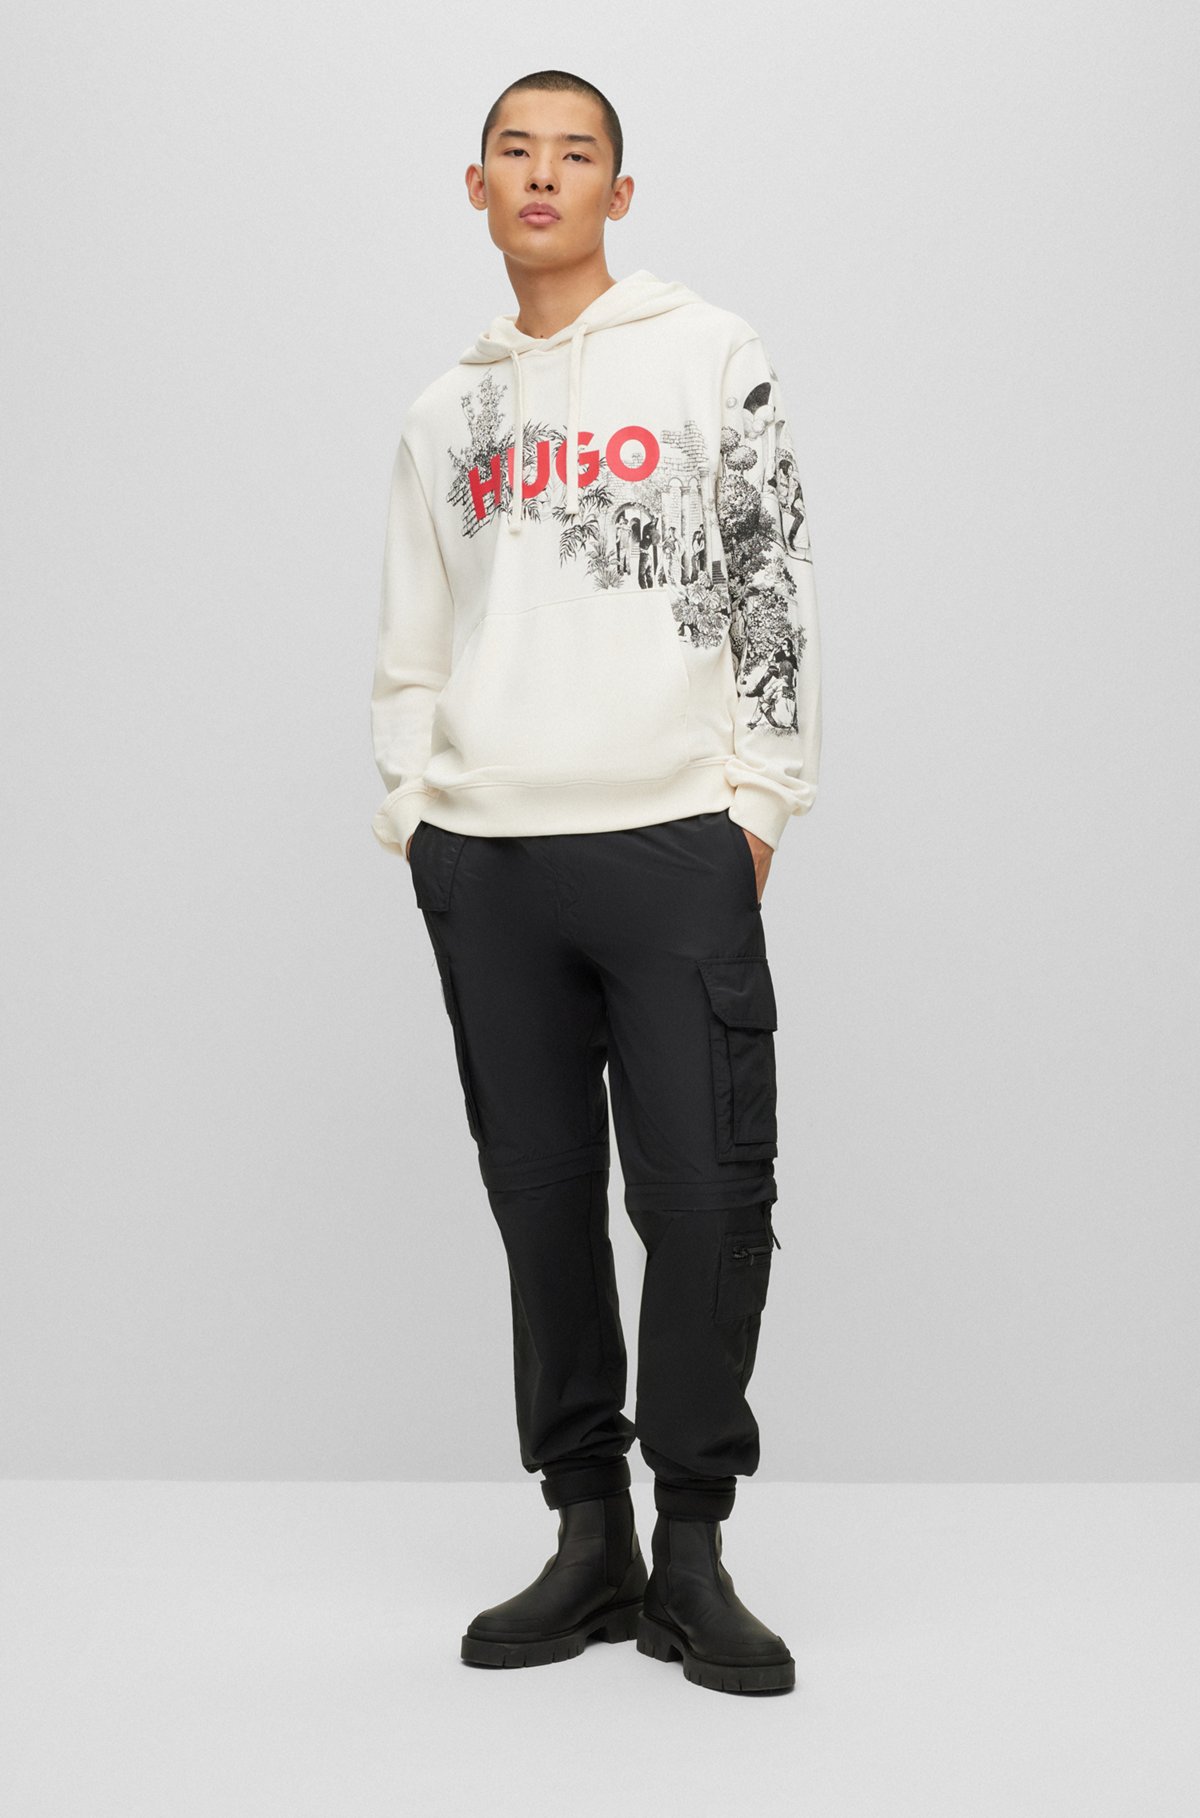 Cotton-terry hoodie with logo and artwork, White